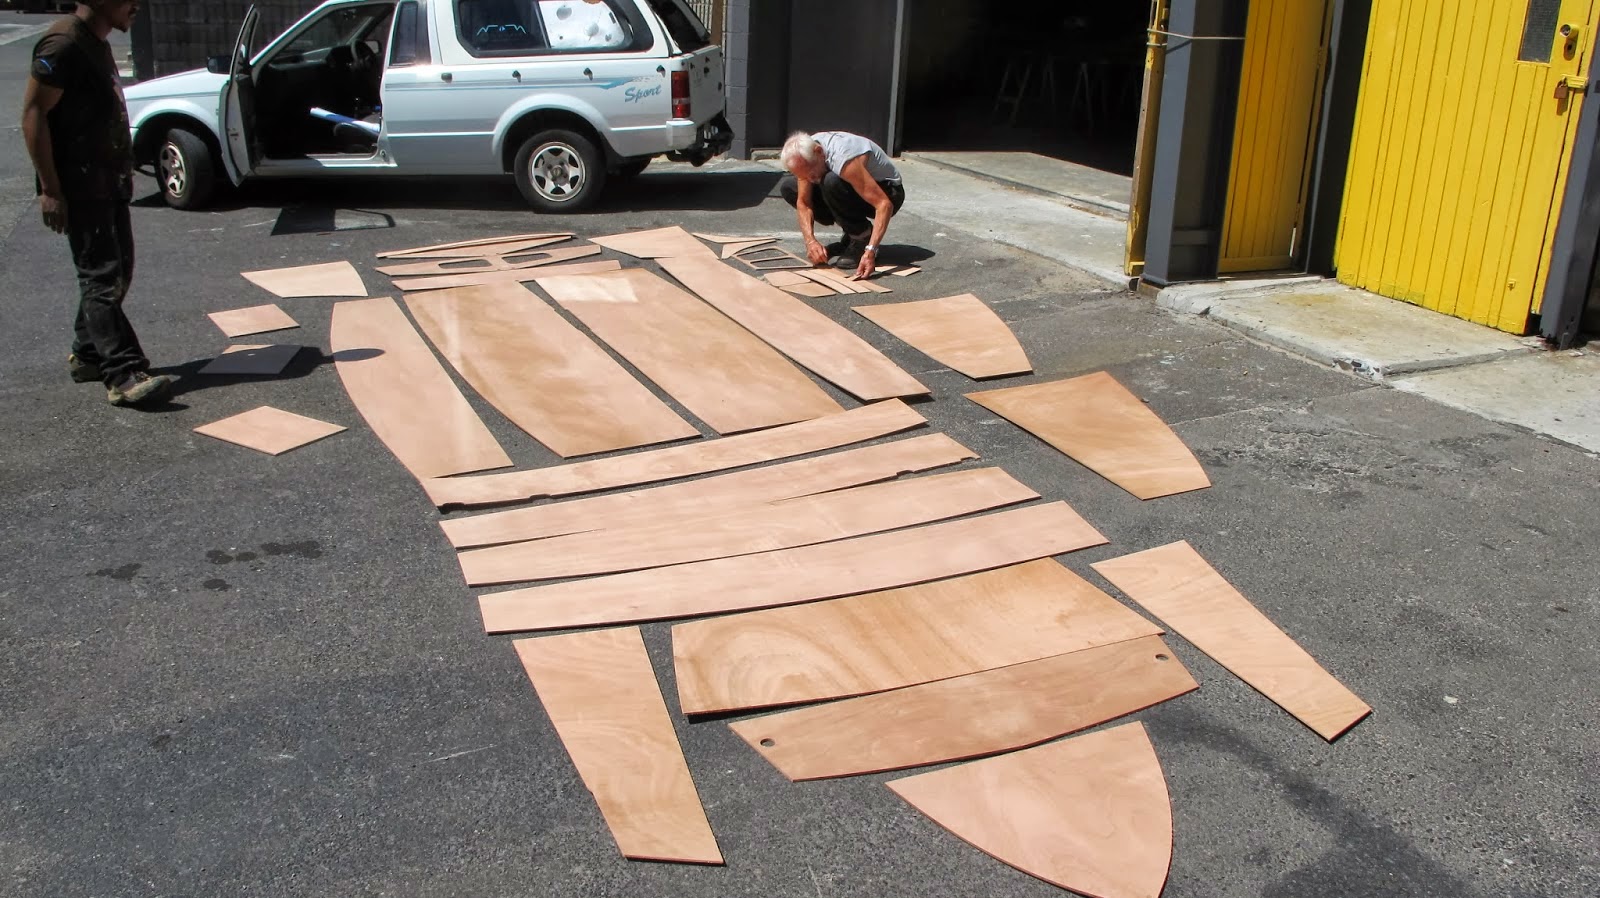 Cnc Cut Plywood Boat Kits In Uk Autos Post